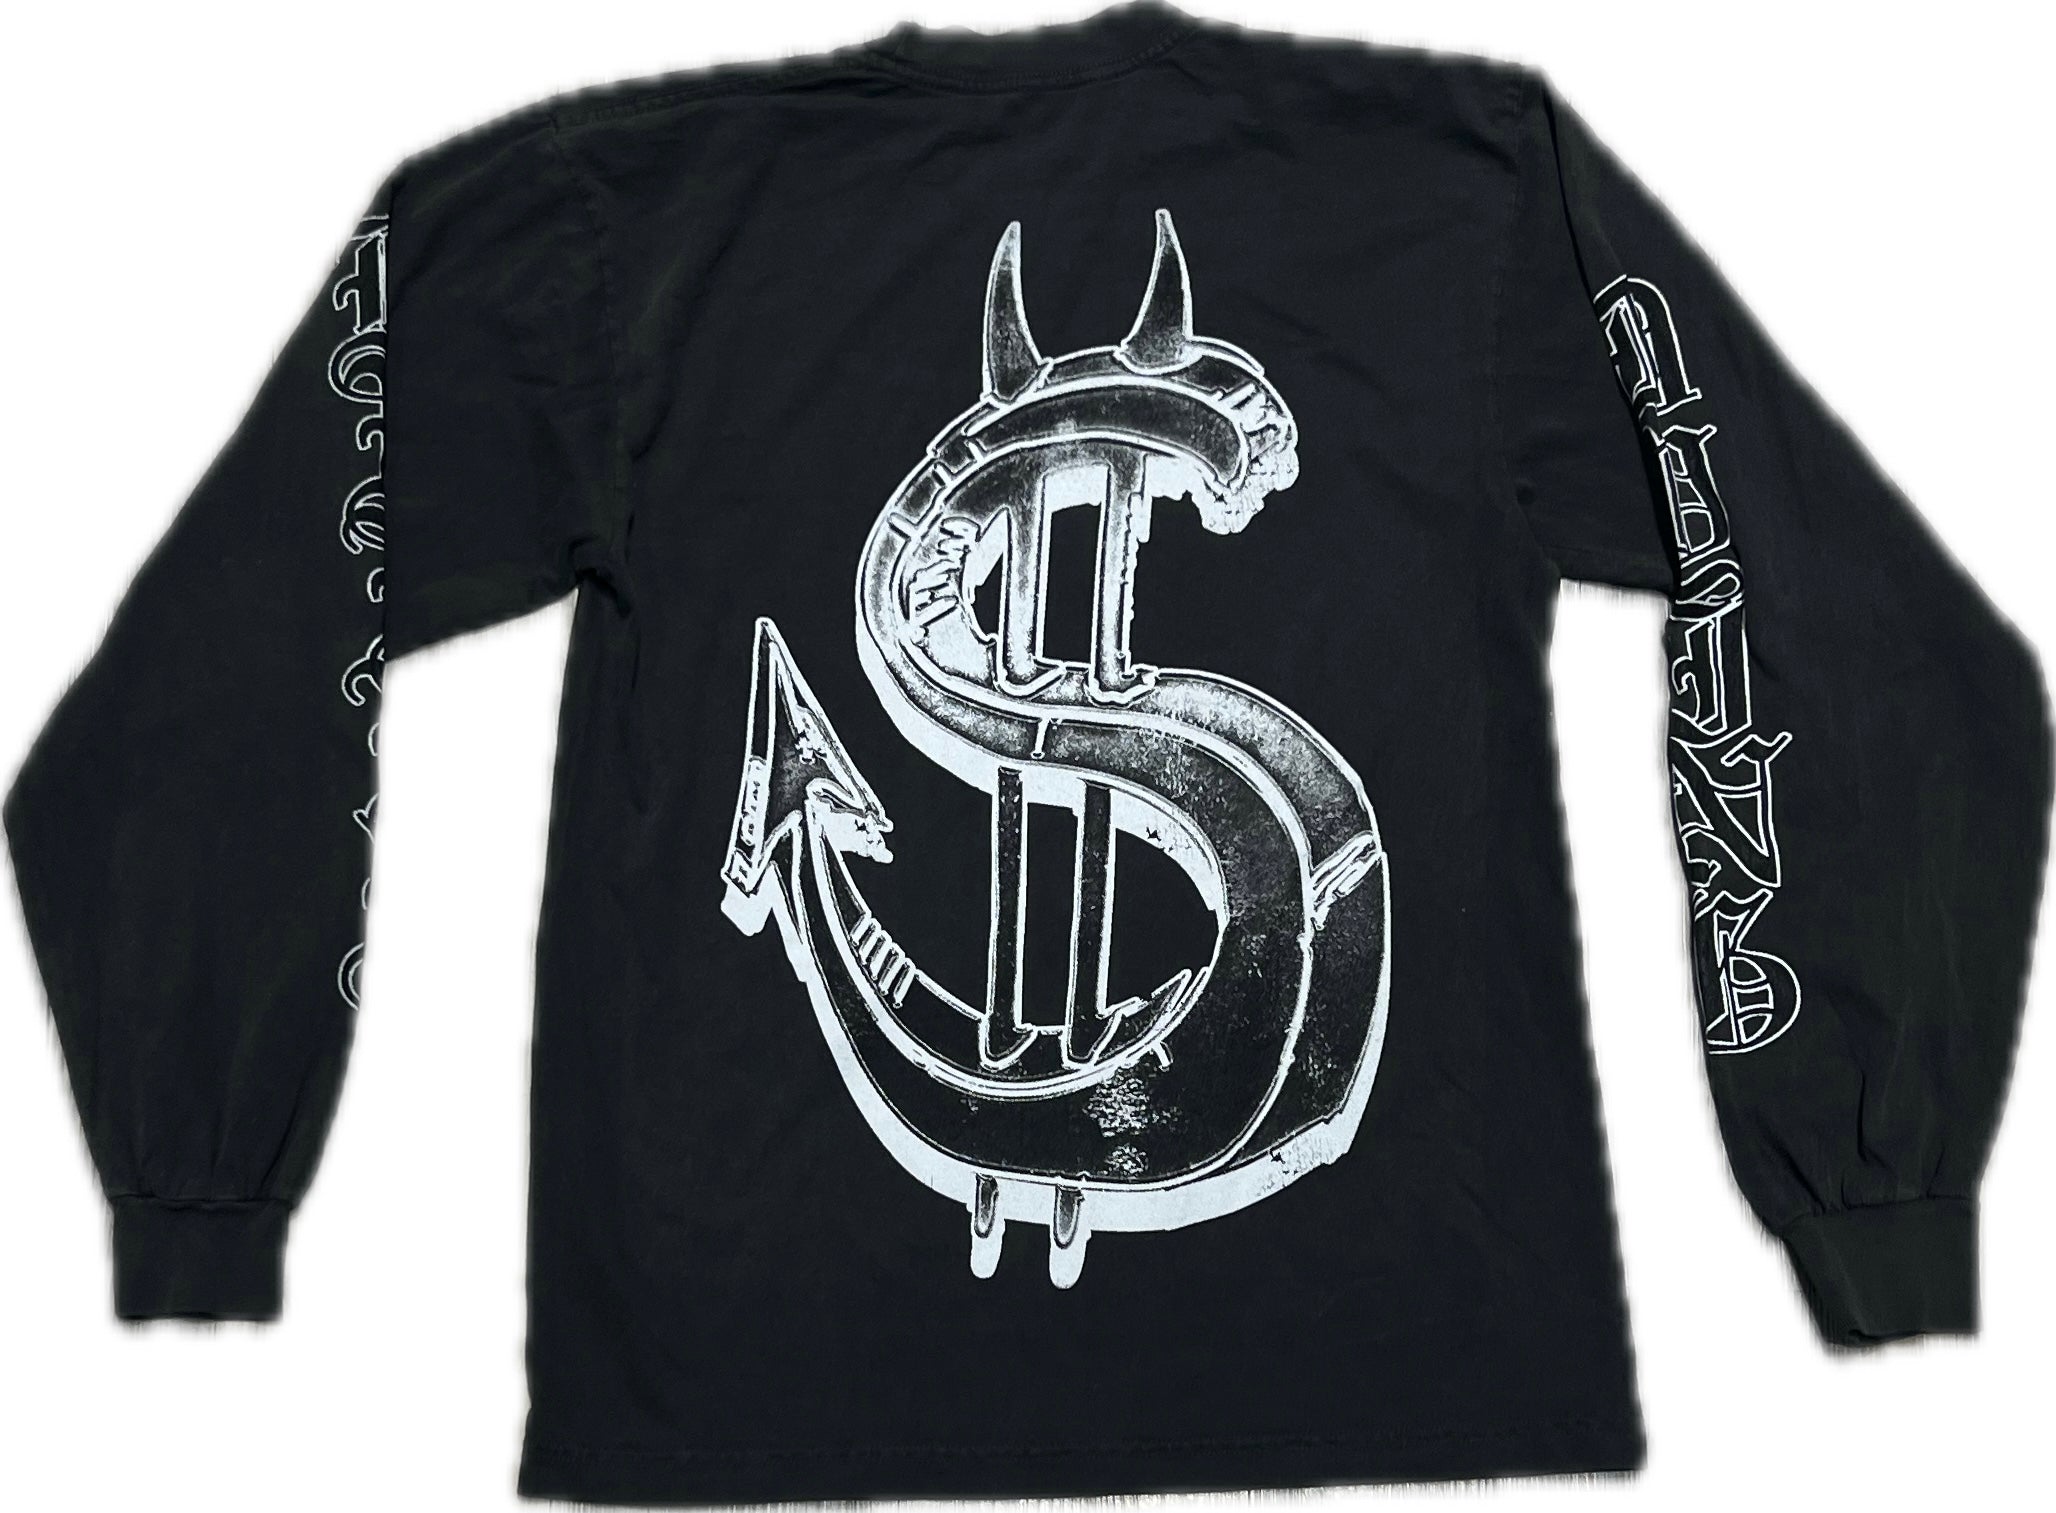 Black Dying Breed L/S